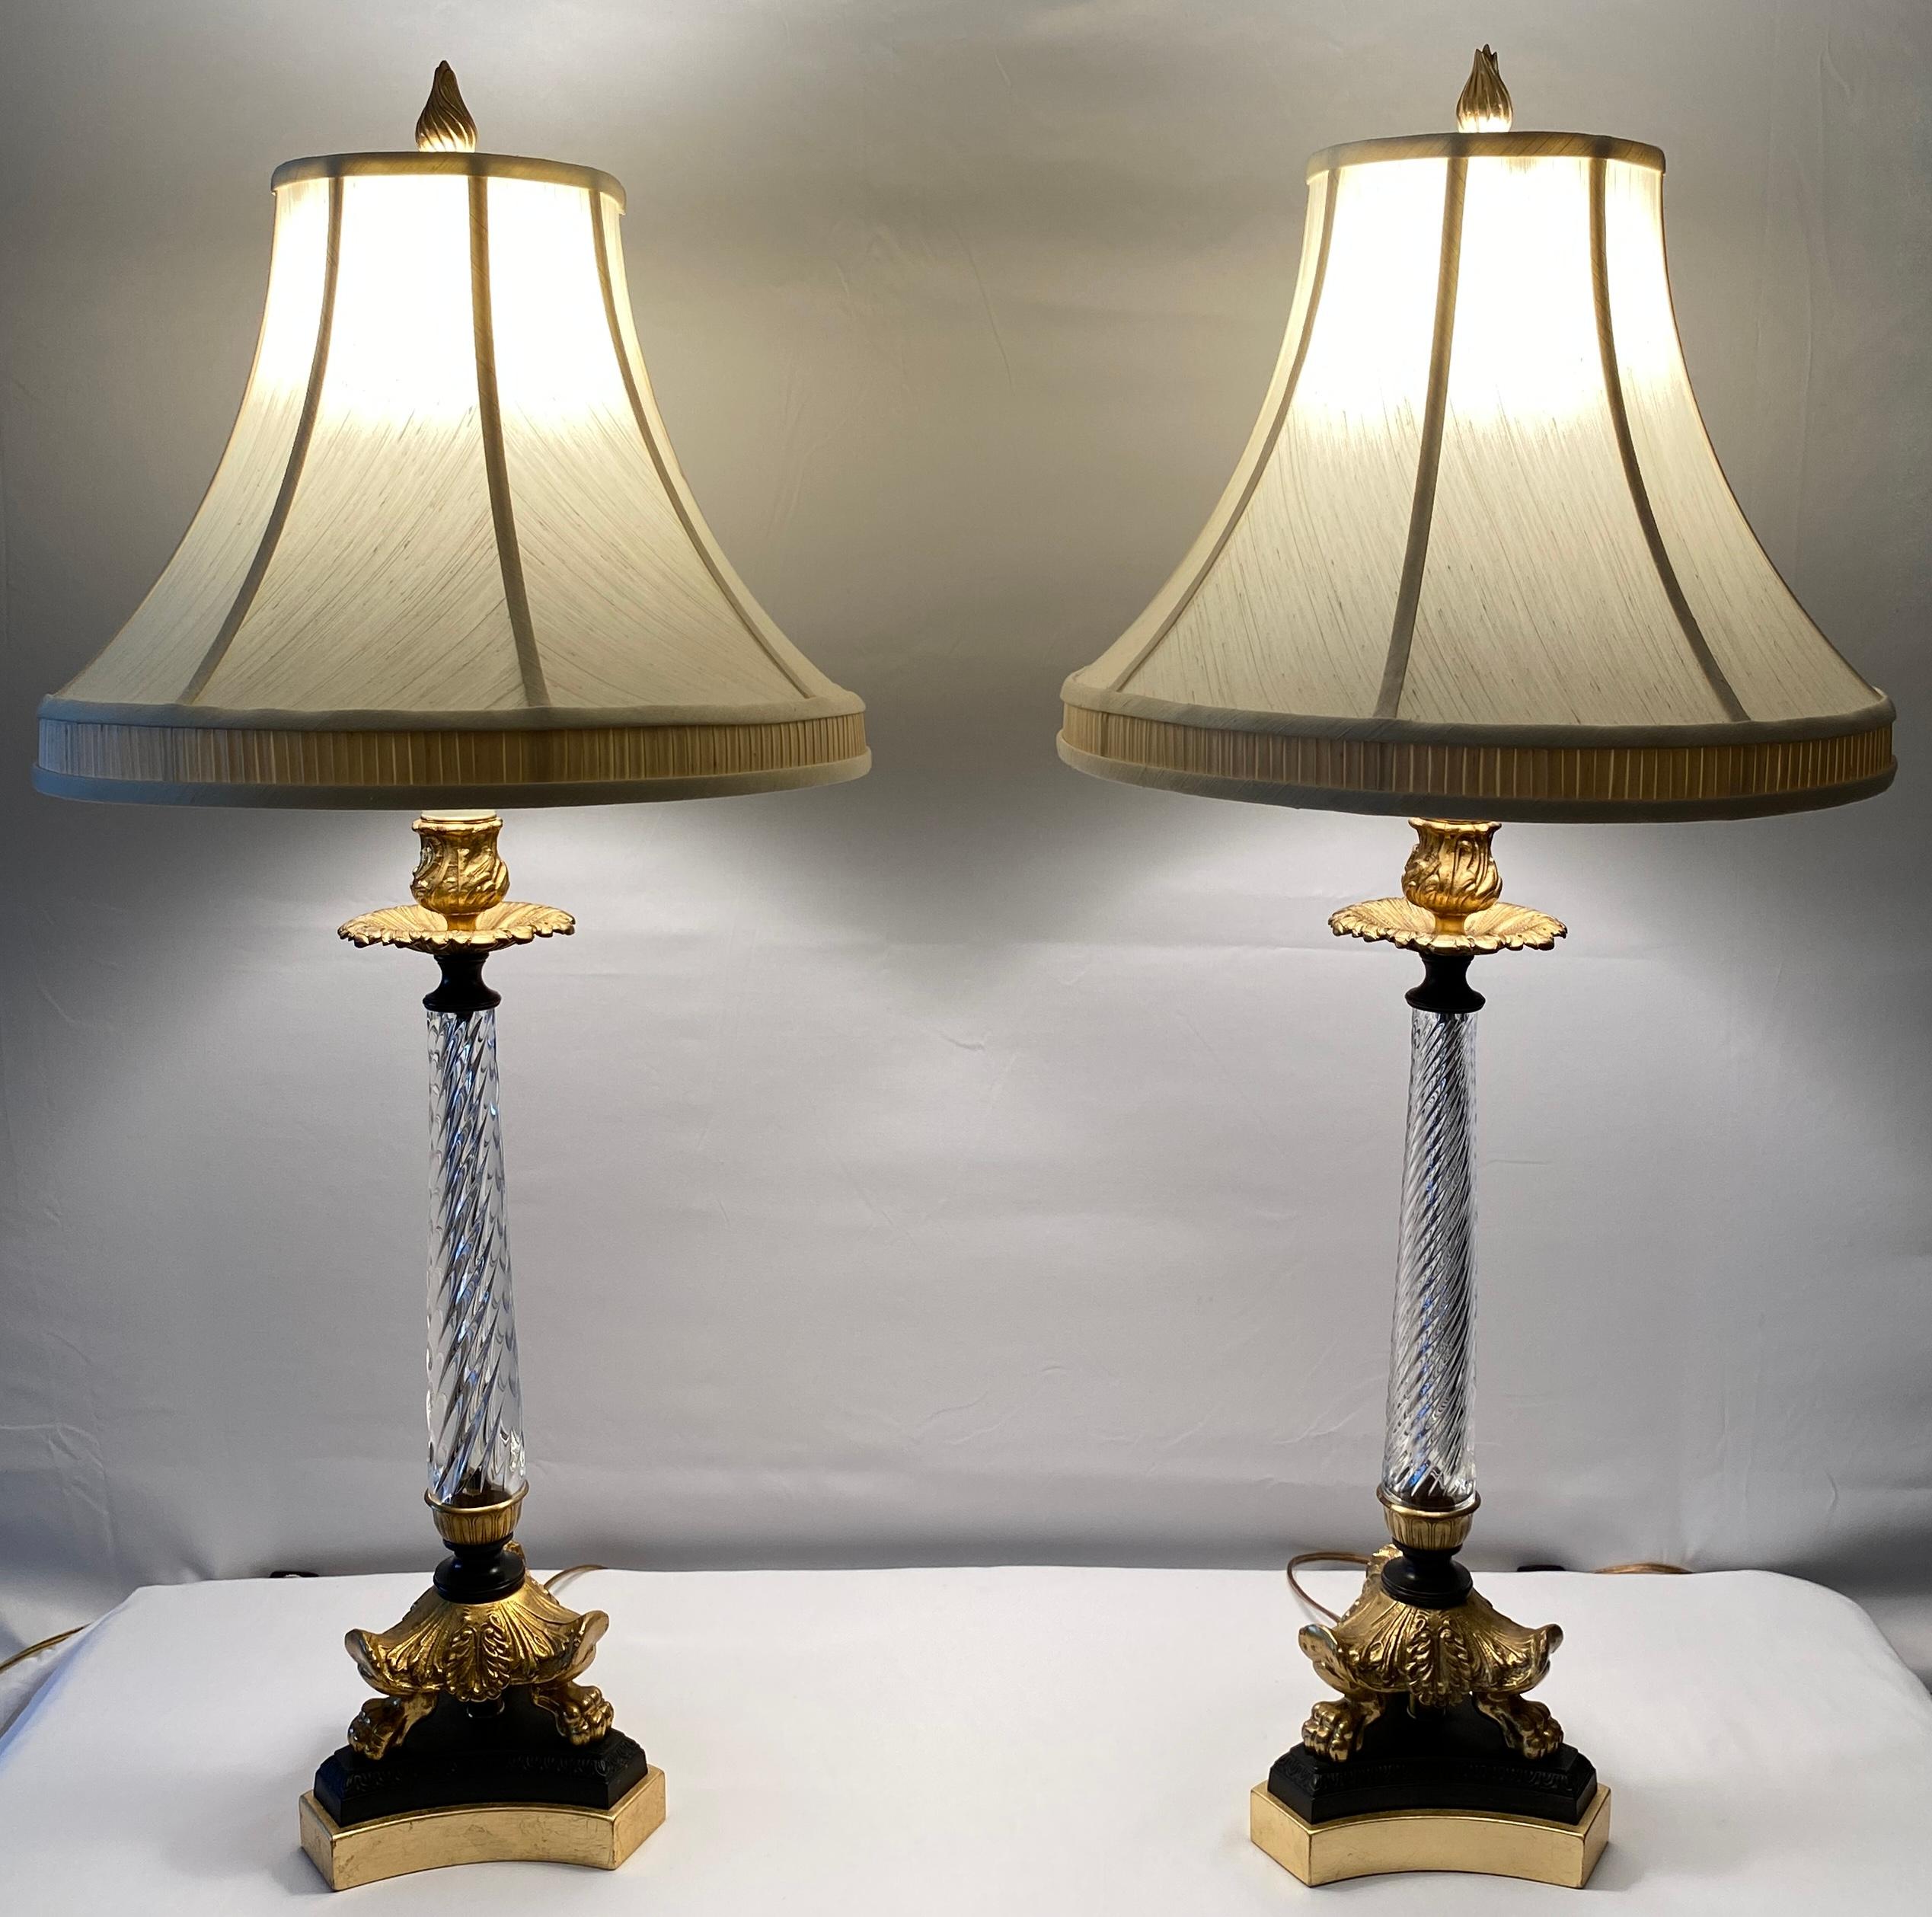 A pair of crystal table lamps, giltwood element wired for electricity, and fitted with two new sockets each.

Rope-twist motif complete with cut crystal reservoir mounted in finely chiselled bronze with claw feet designs further accentuated with